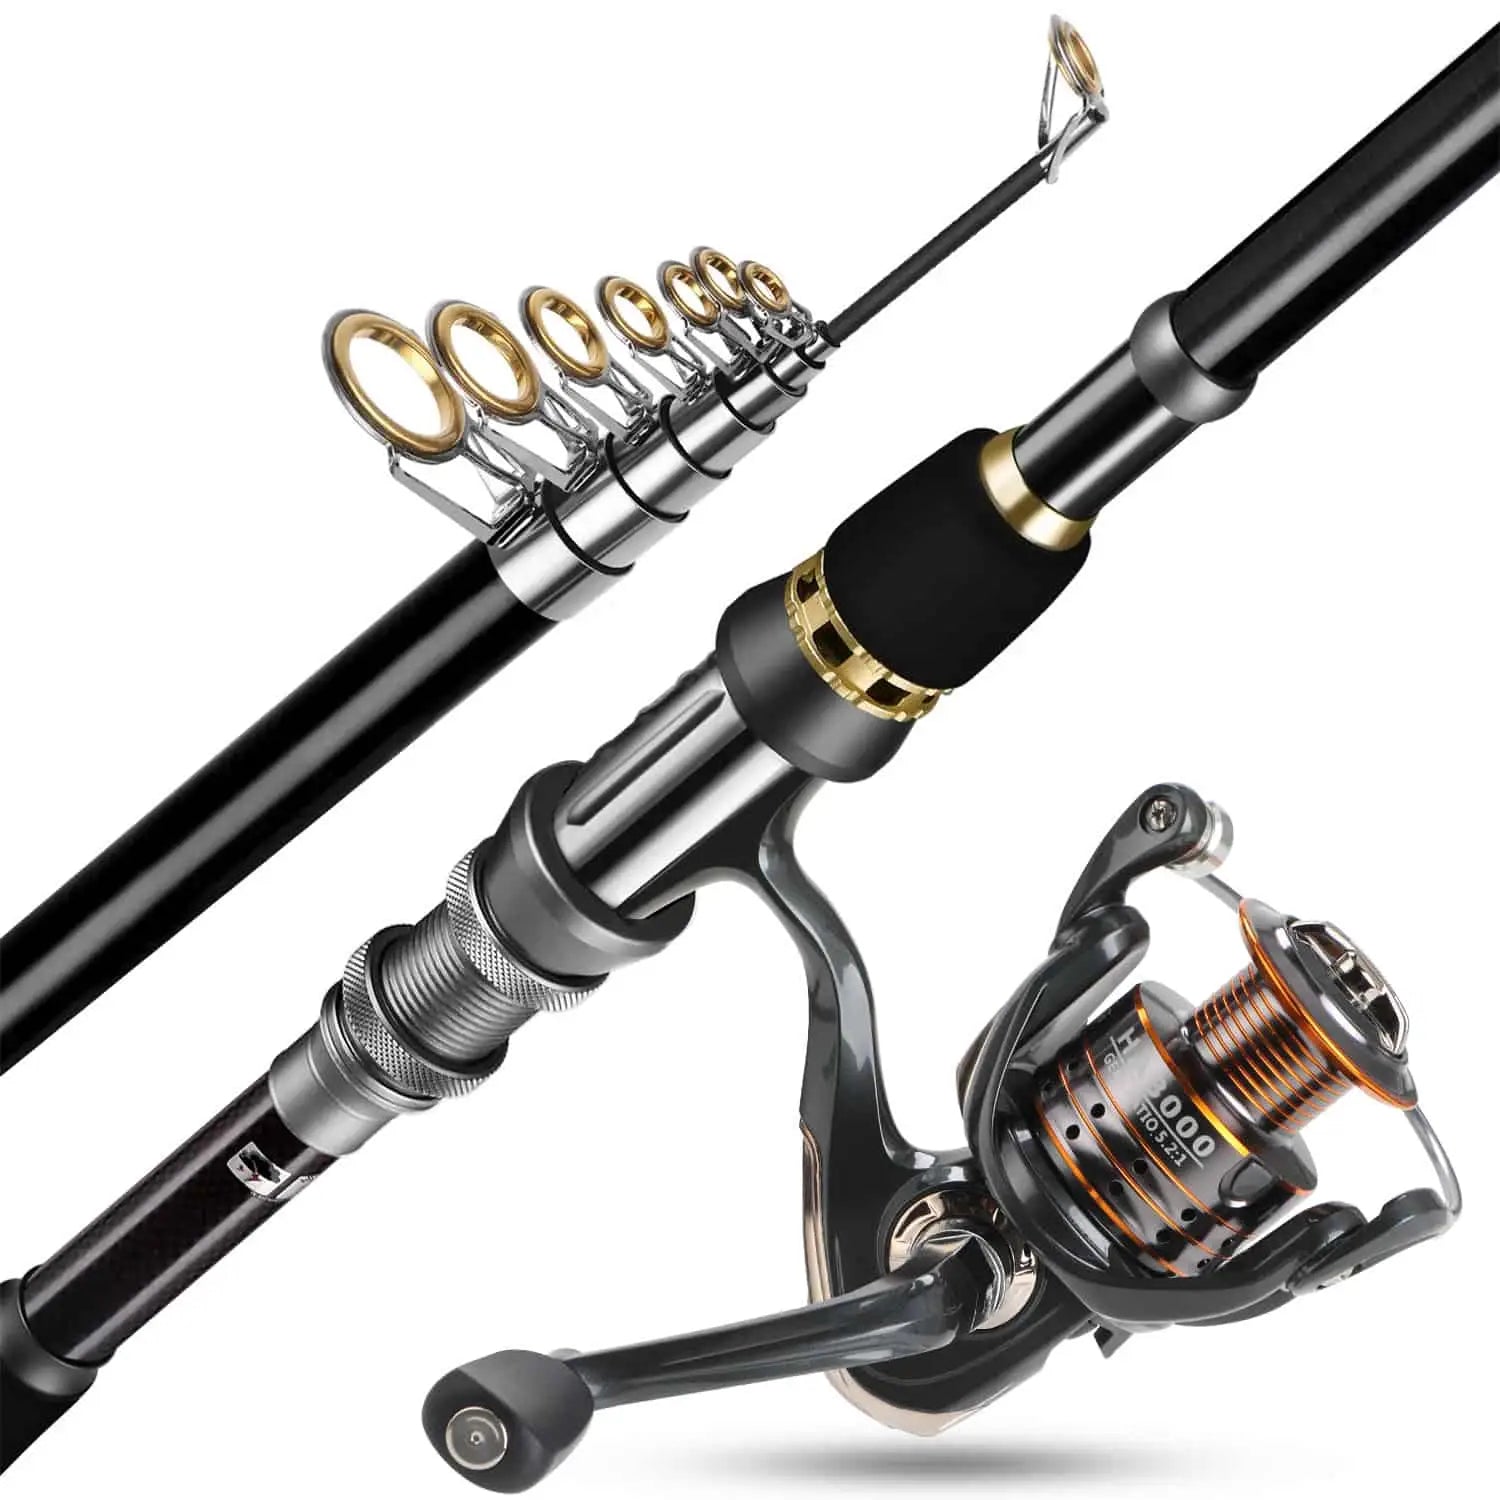 Buy PLUSINNO Elite Hunter Two-Piece Spining Casting Fishing Rod, Graphite  Medium Light Fast Action Bass Baitcasting Fishing Rods 7FT 2pc Freshwater  Saltwater Fishing Rods-A Online at Low Prices in India 